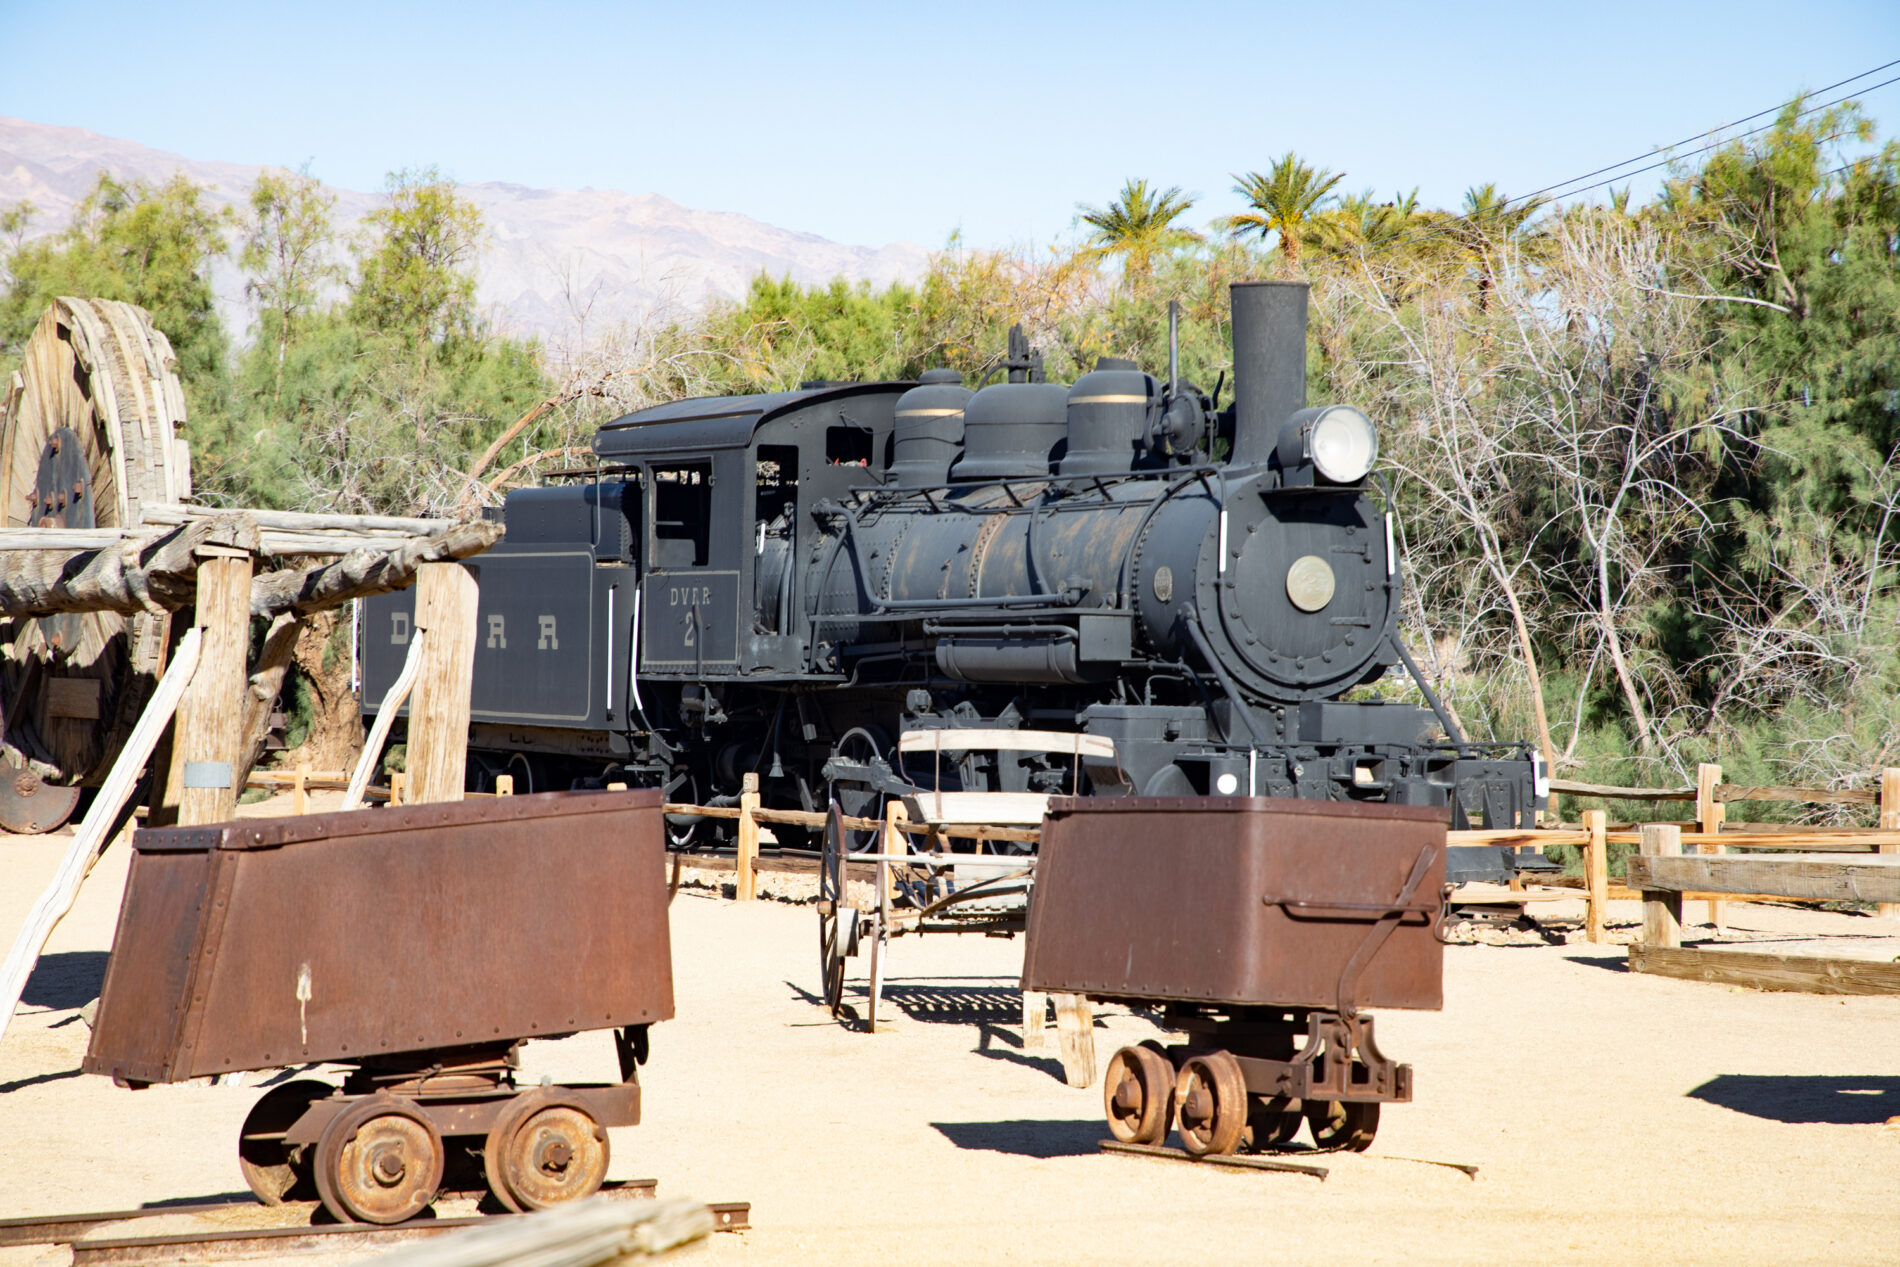 Old locomotive and other mining equipment on display in the museum at Furnace Creek, Death Valley.